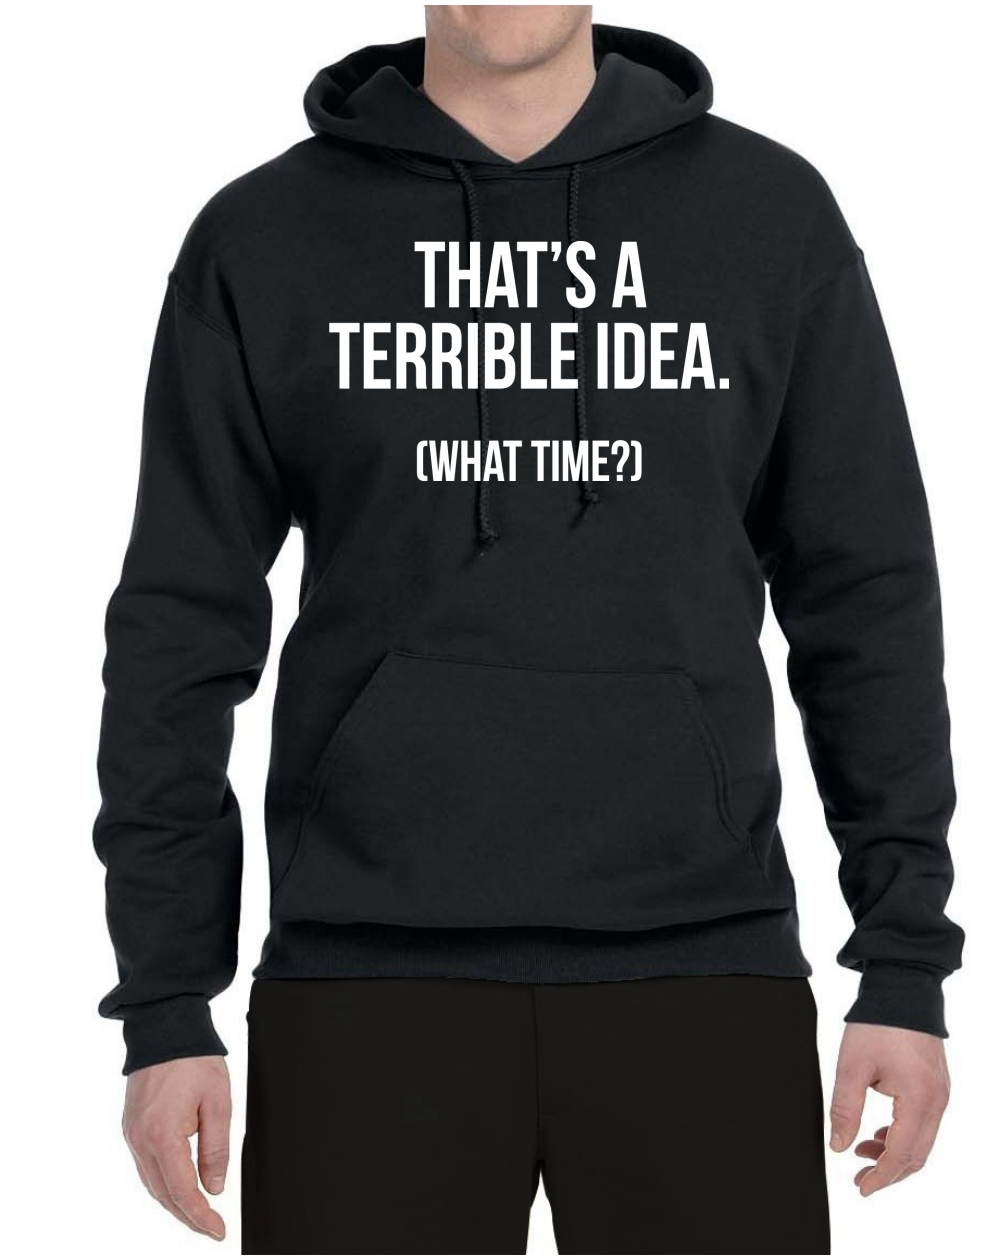 That's A Terrible Idea, What Time? Unisex Graphic Hoodie Sweatshirt | eBay